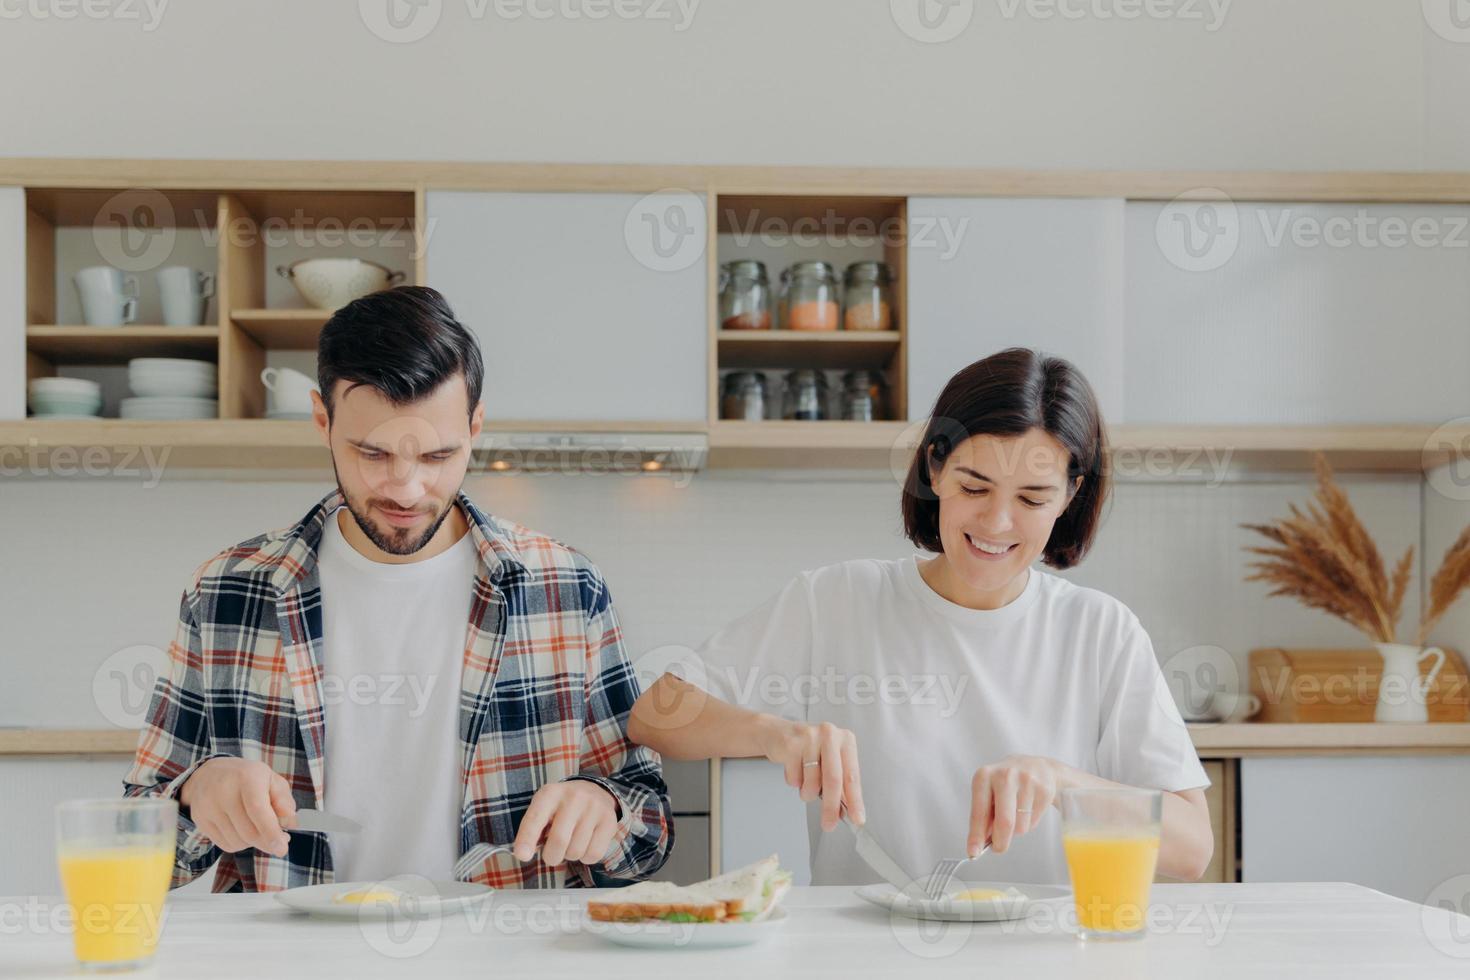 Family married couple pose at kitchen table, have delicious breakfast, talk about plannings on day, eat fried eggs and burgers, drink fresh apple juice, dressed casually, enjoy domestic atmosphere photo